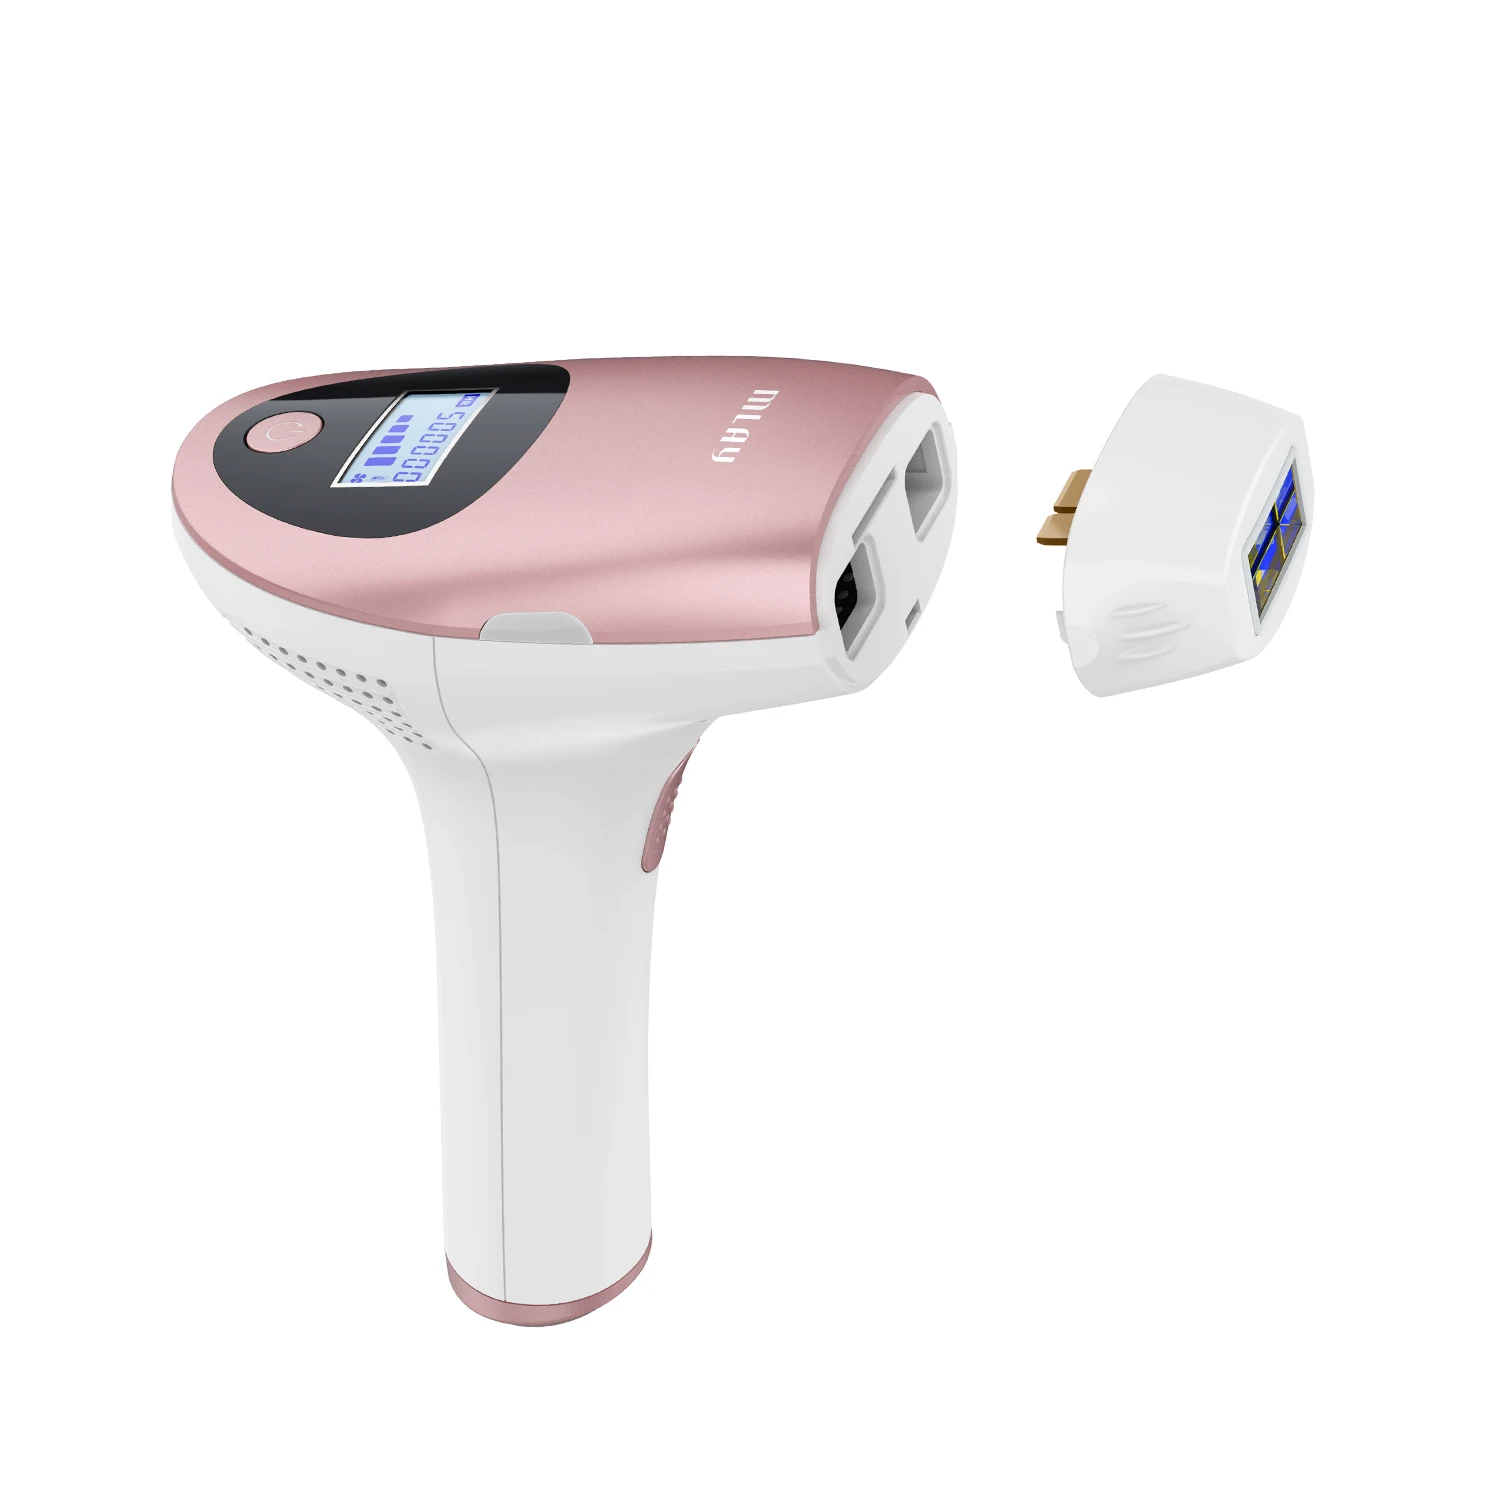 MLAY T3 Home Handheld Mini IPL Laser Device Portable Skin Rejuvenation and Permanent Hair Removal with Acne Treatment Feature